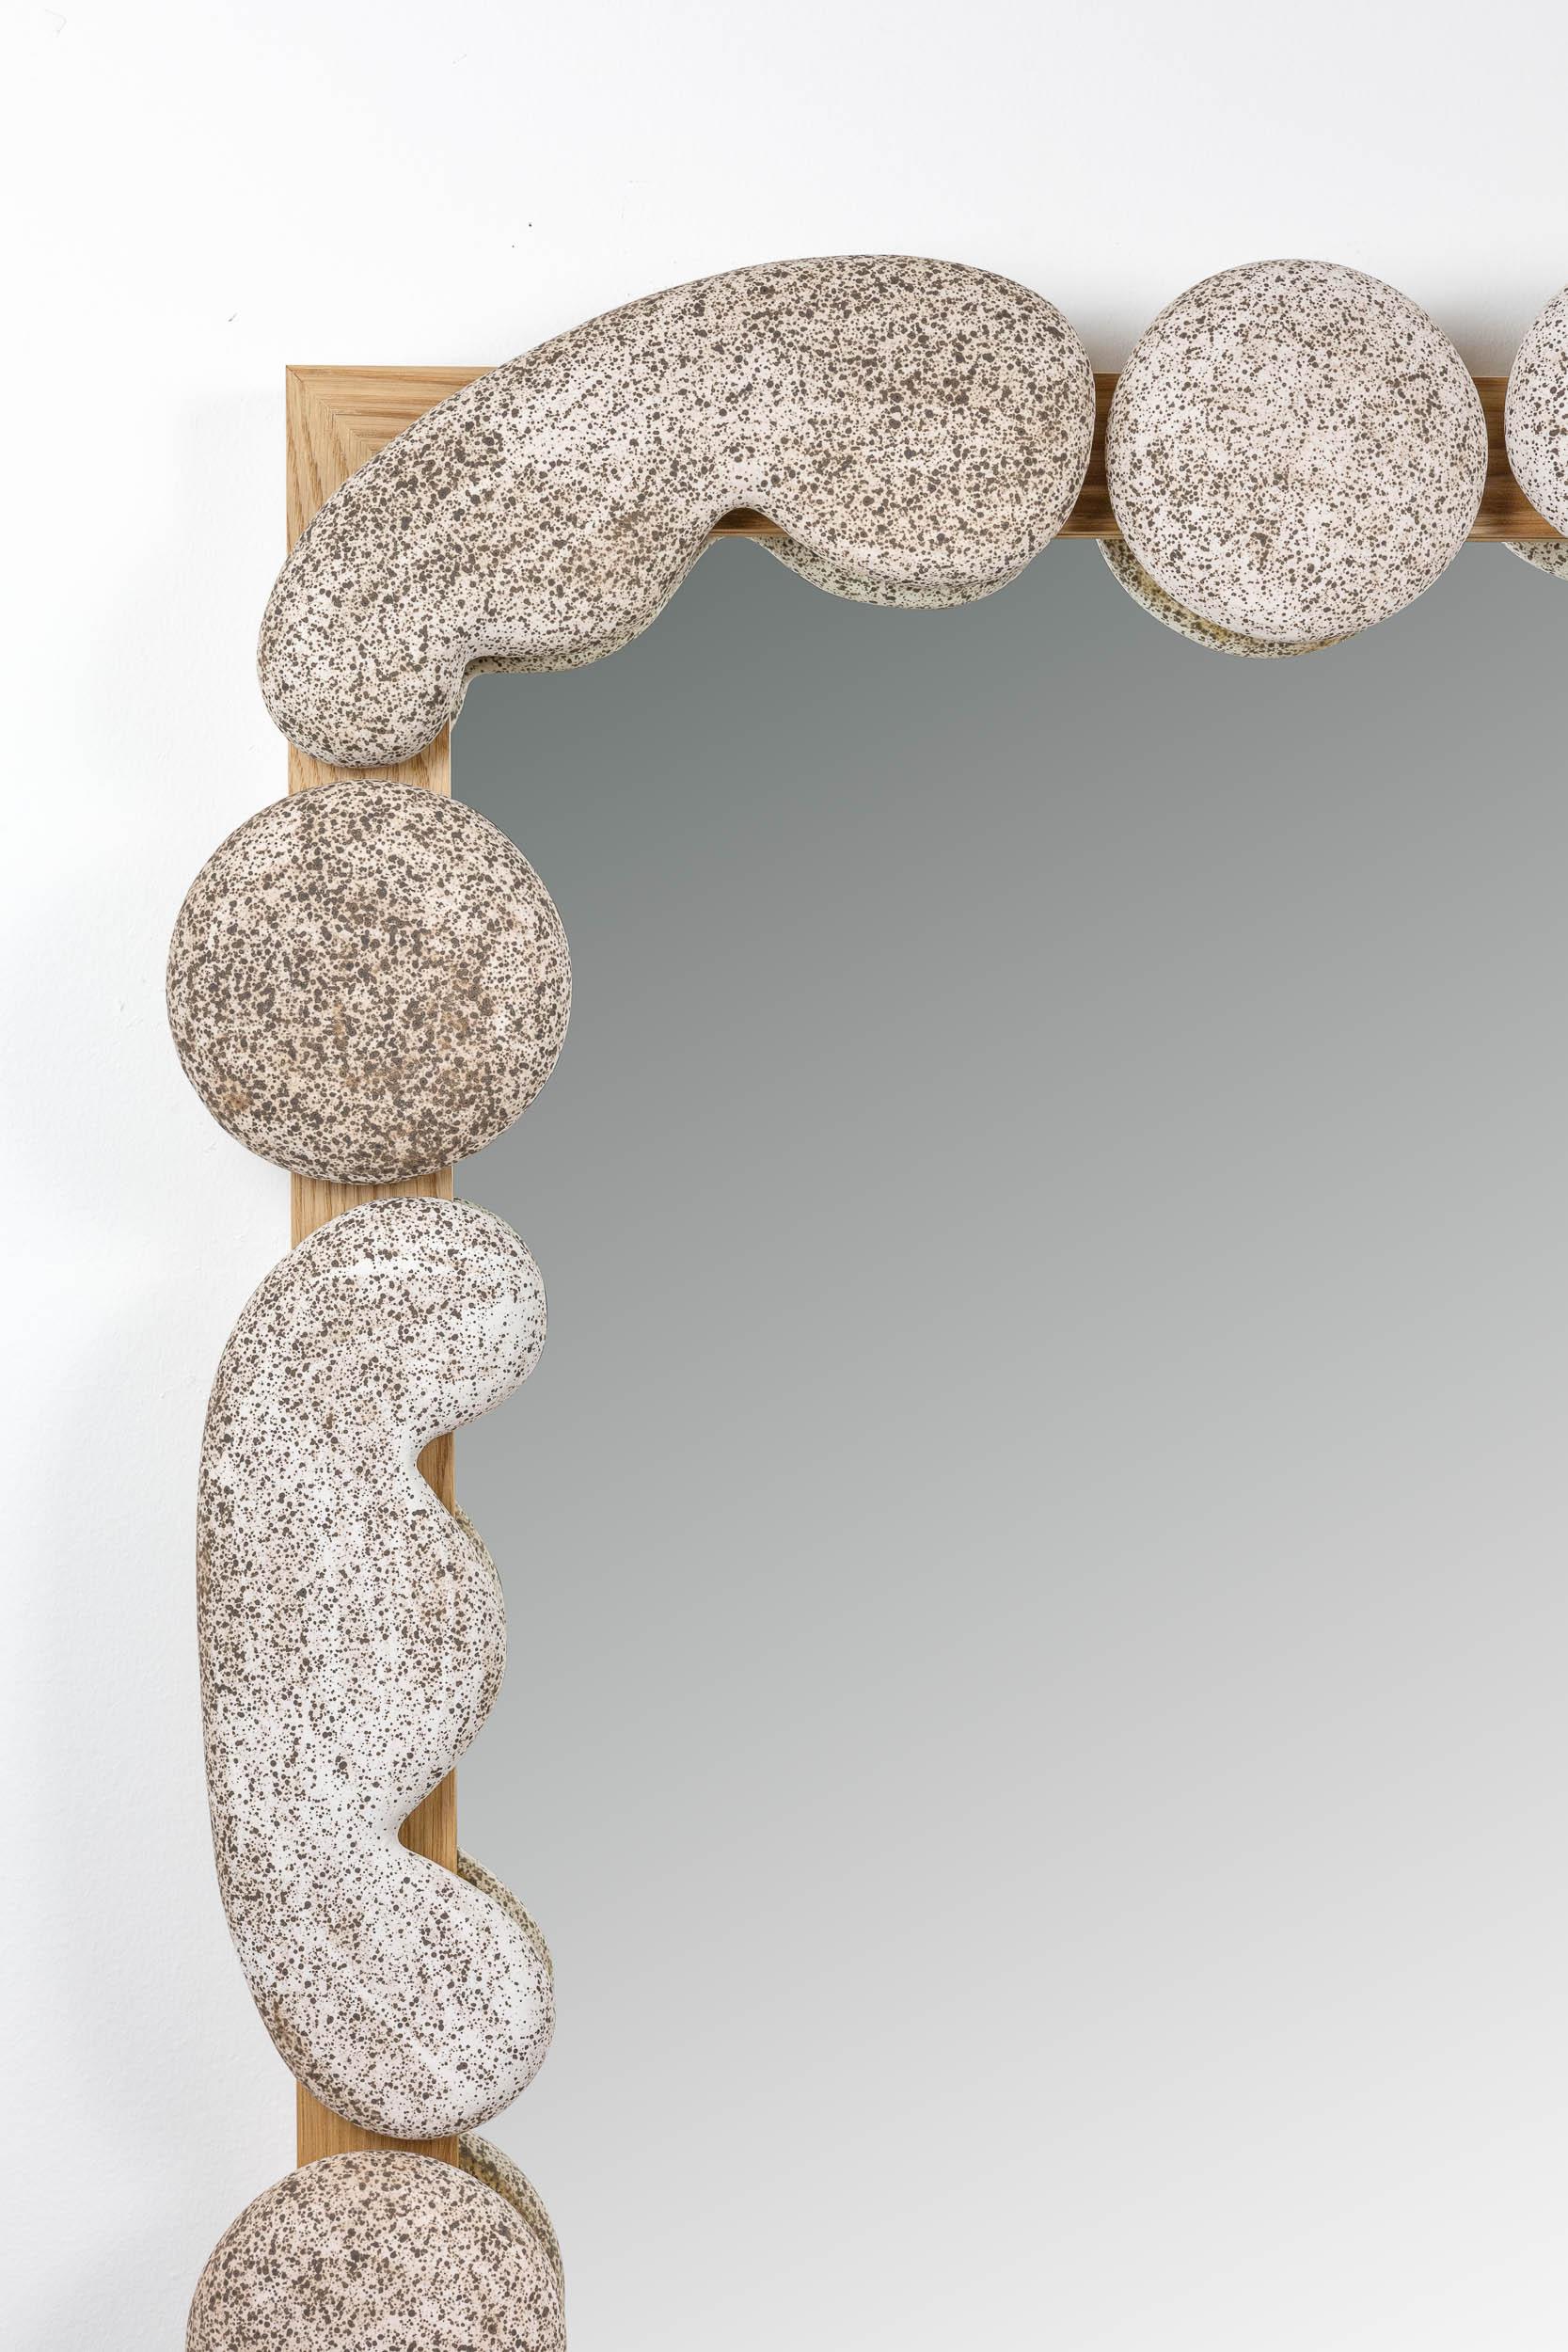 In-Stock, Ceramic & Hardwood, Roebling Wall Mirror, Organic Modern, Sculptural In New Condition For Sale In Brooklyn, NY